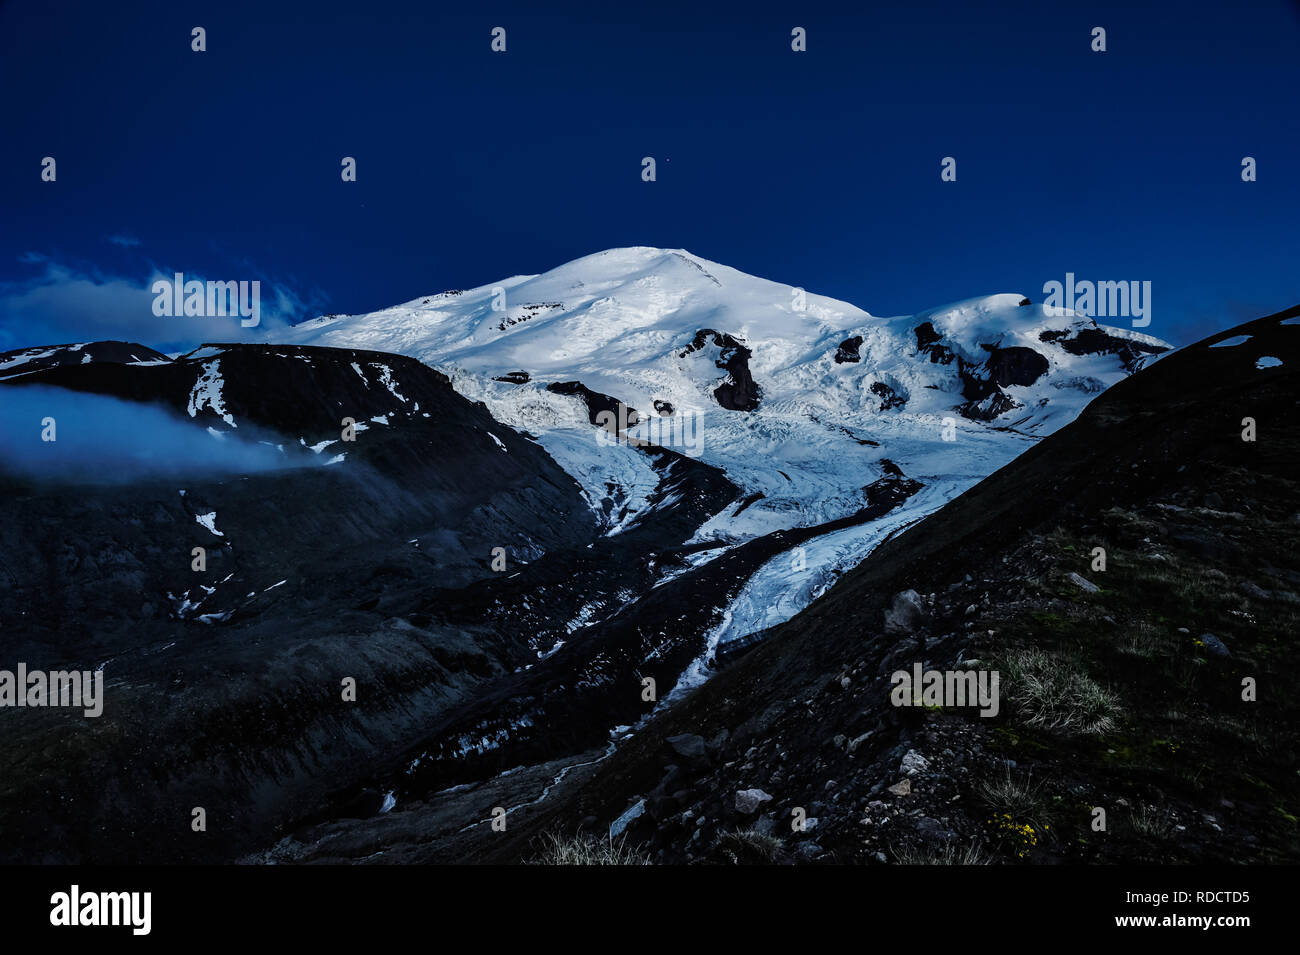 Alone snowy and icy Elbrus mountain at evening time with clear dark blue sky and one star on it. A view from a path near glacier moraine. Stock Photo